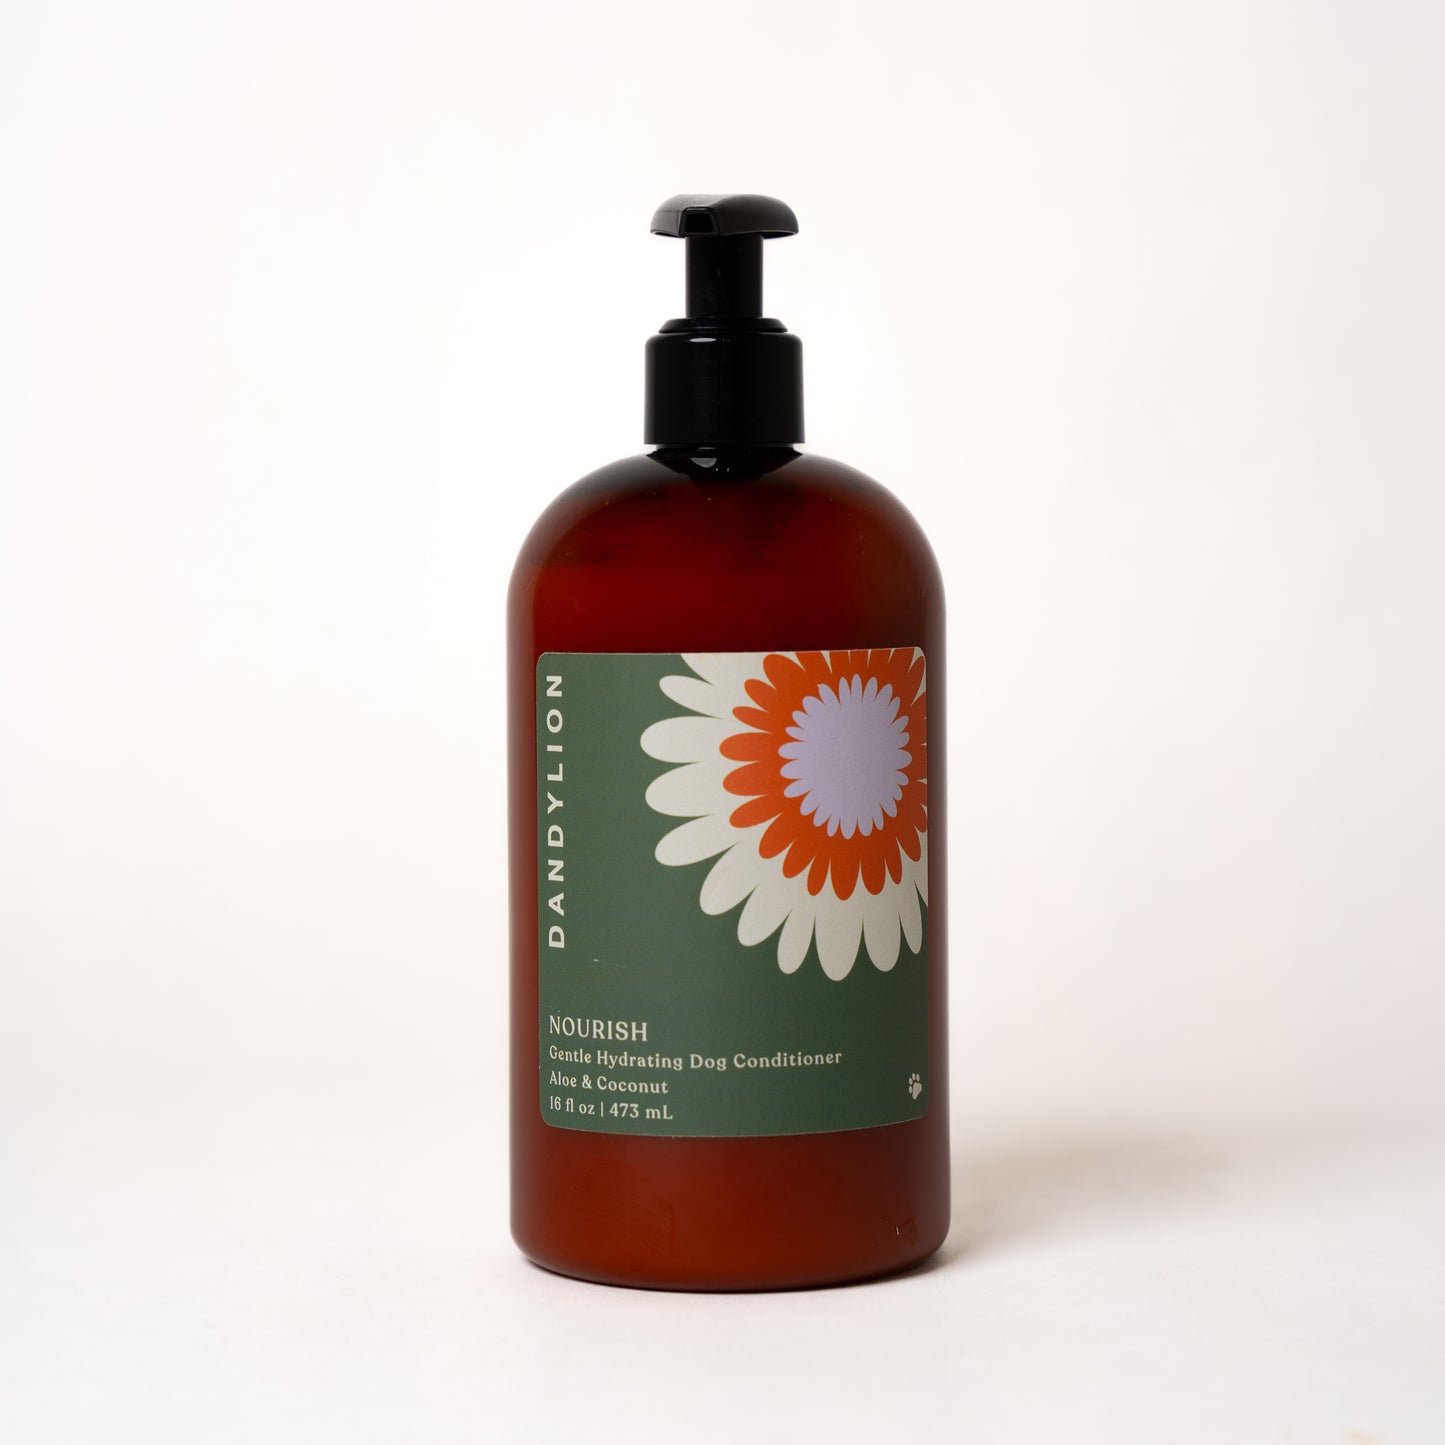 Load image into Gallery viewer, Nourish Gentle Hydrating Dog Conditioner
